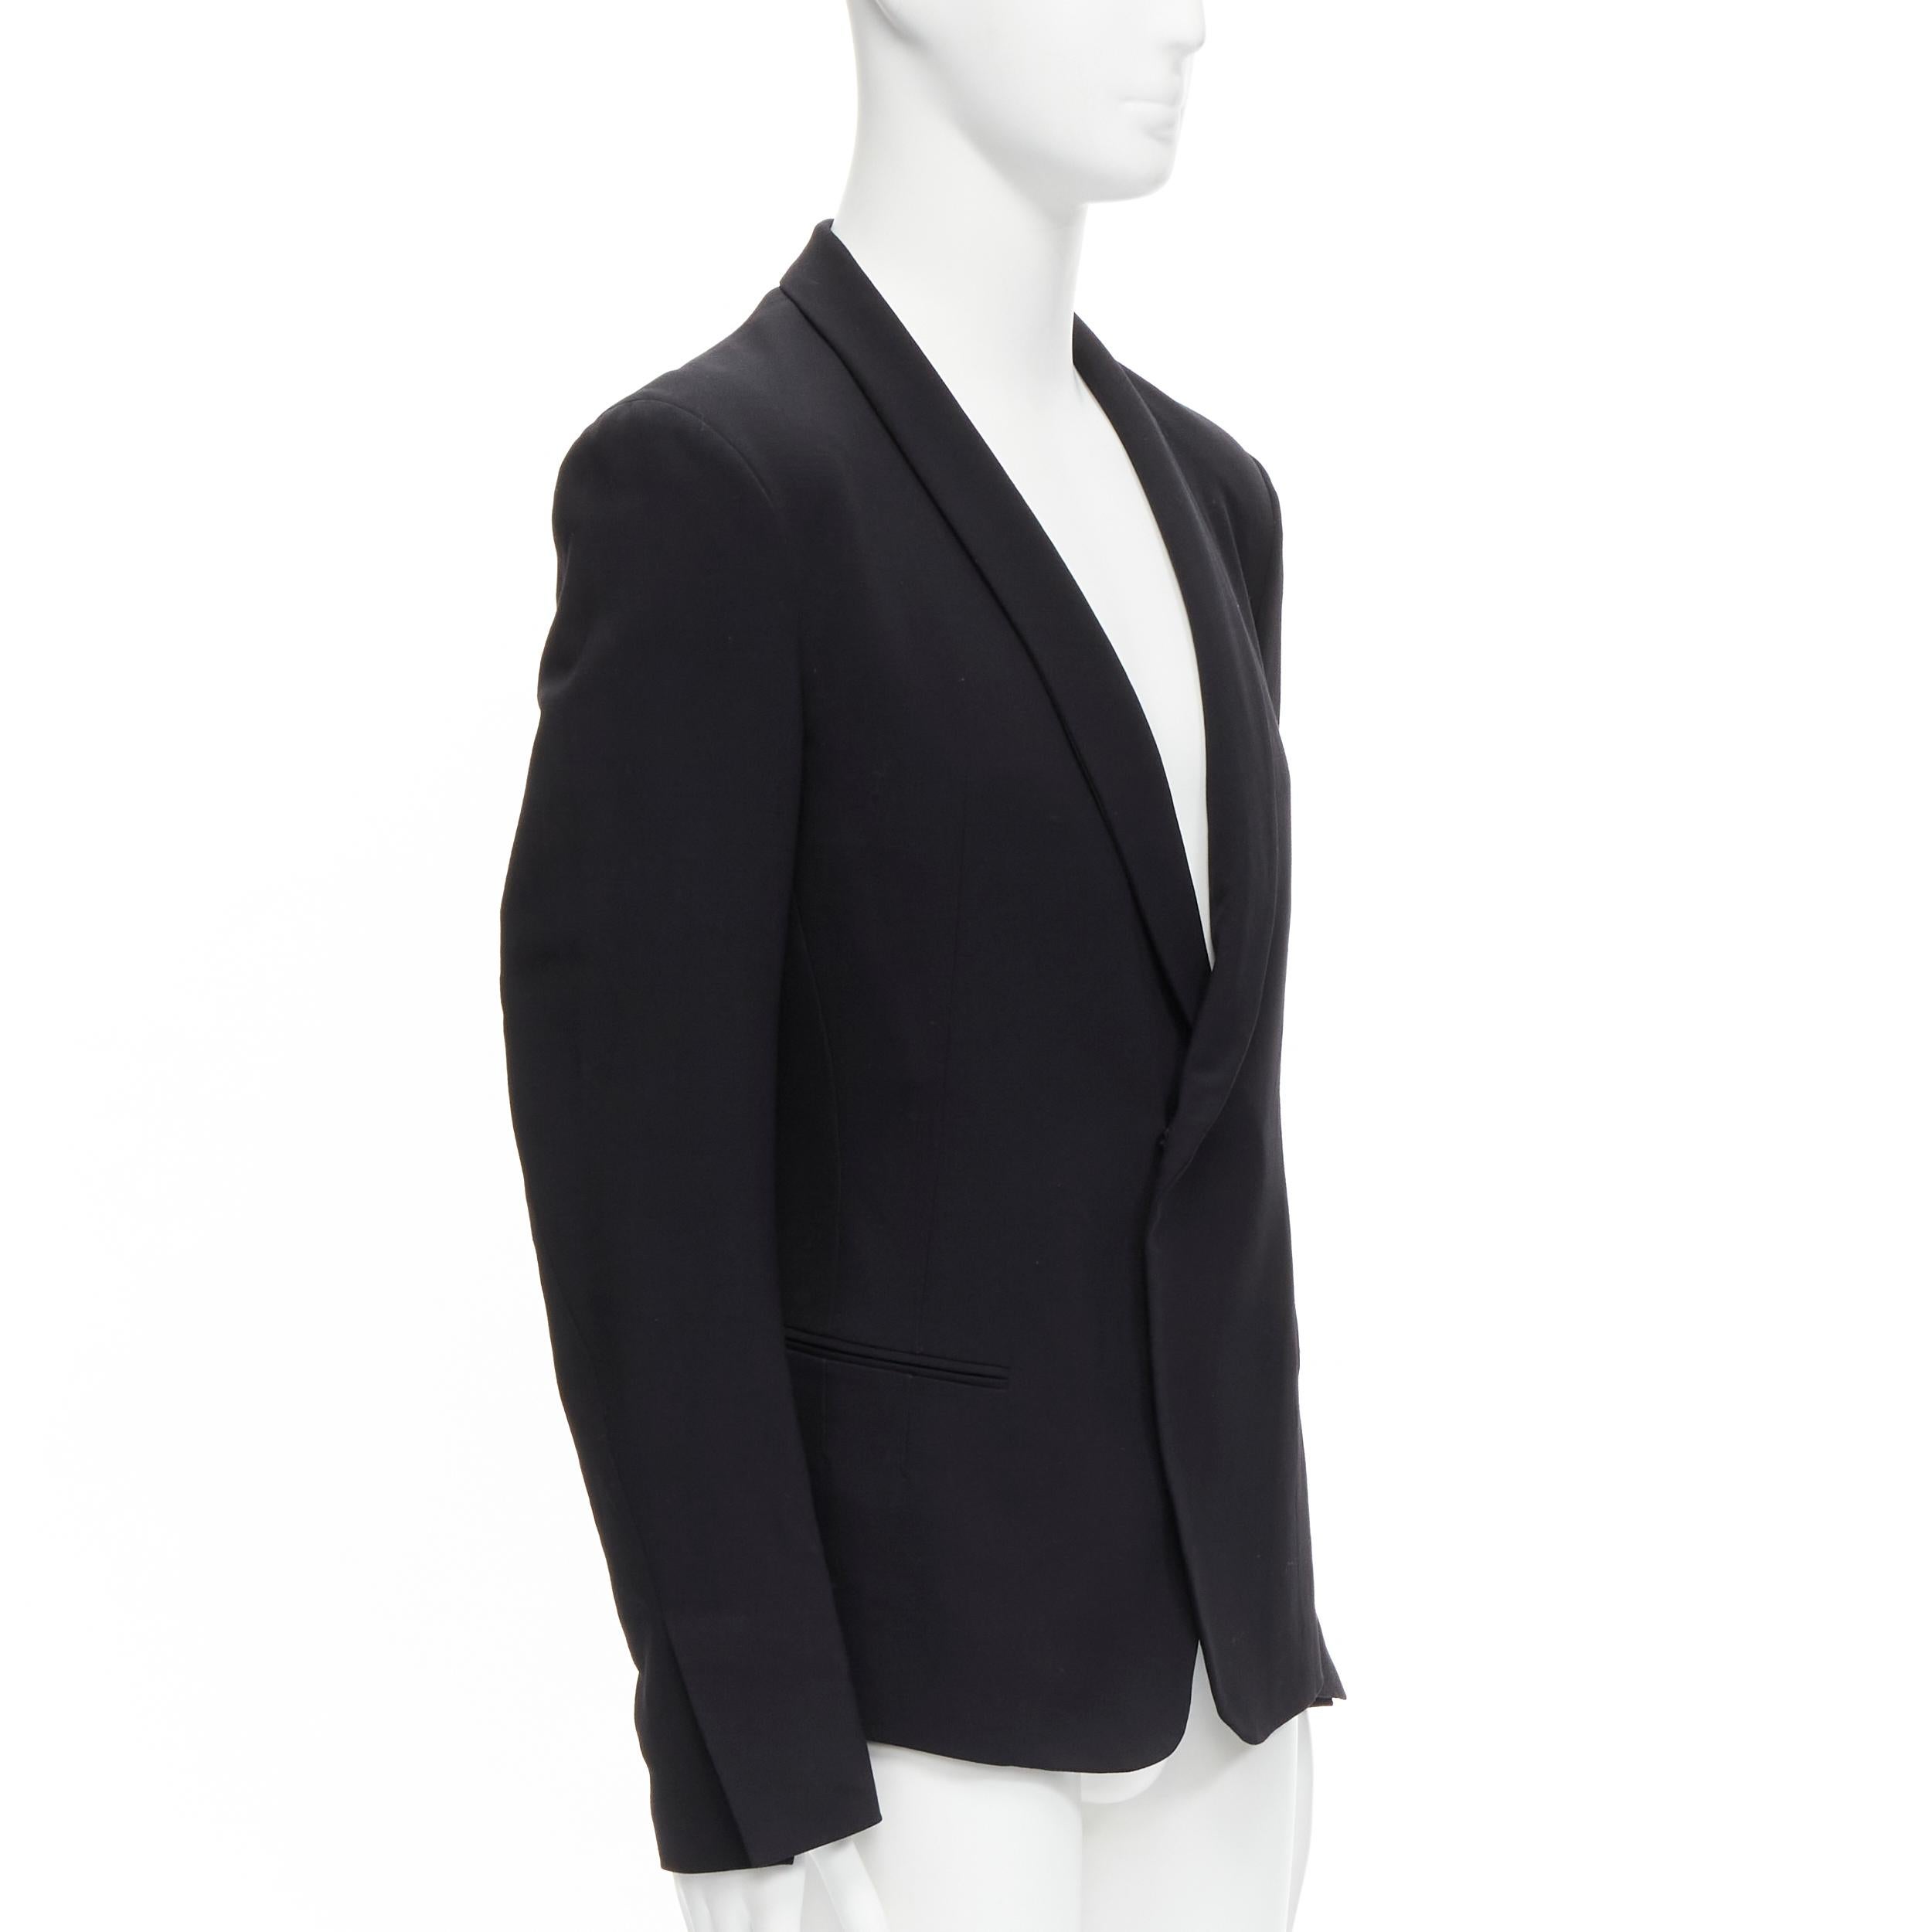 HAIDER ACKERMANN black virgin wool blend shawl collar blazer jacket S
Reference: CNLE/A00186
Brand: Haider Ackermann
Designer: Haider Ackermann
Material: Virgin Wool, Blend
Color: Black
Pattern: Solid
Closure: Button
Lining: Fabric
Extra Details: